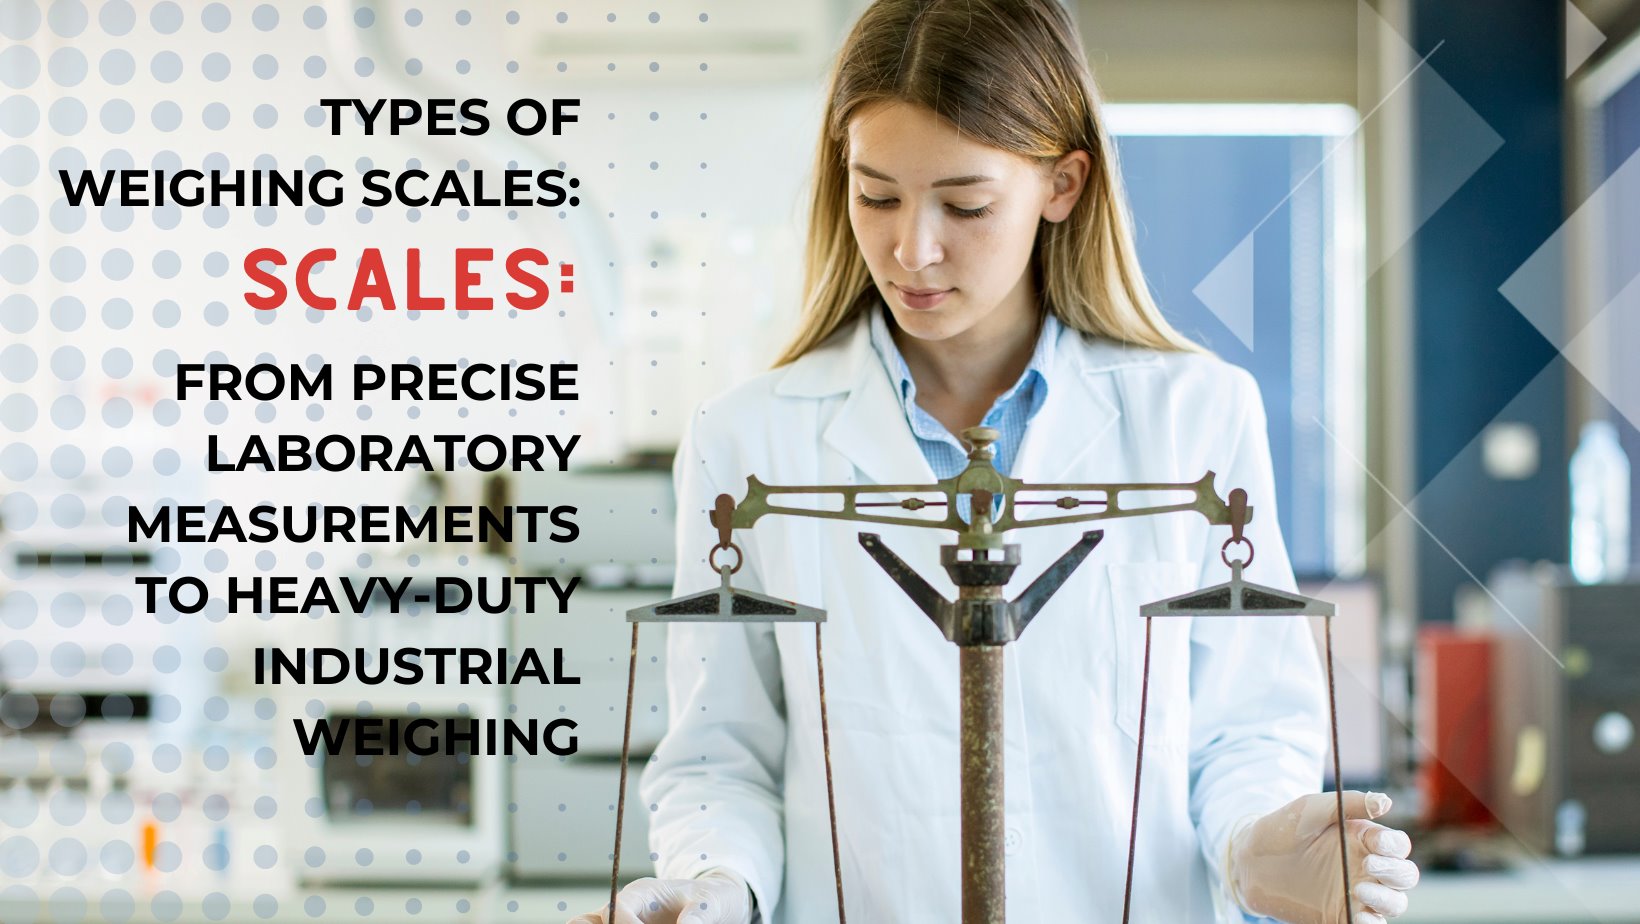 Types of weighing scales: from precise laboratory measurements to heavy-duty industrial weighing